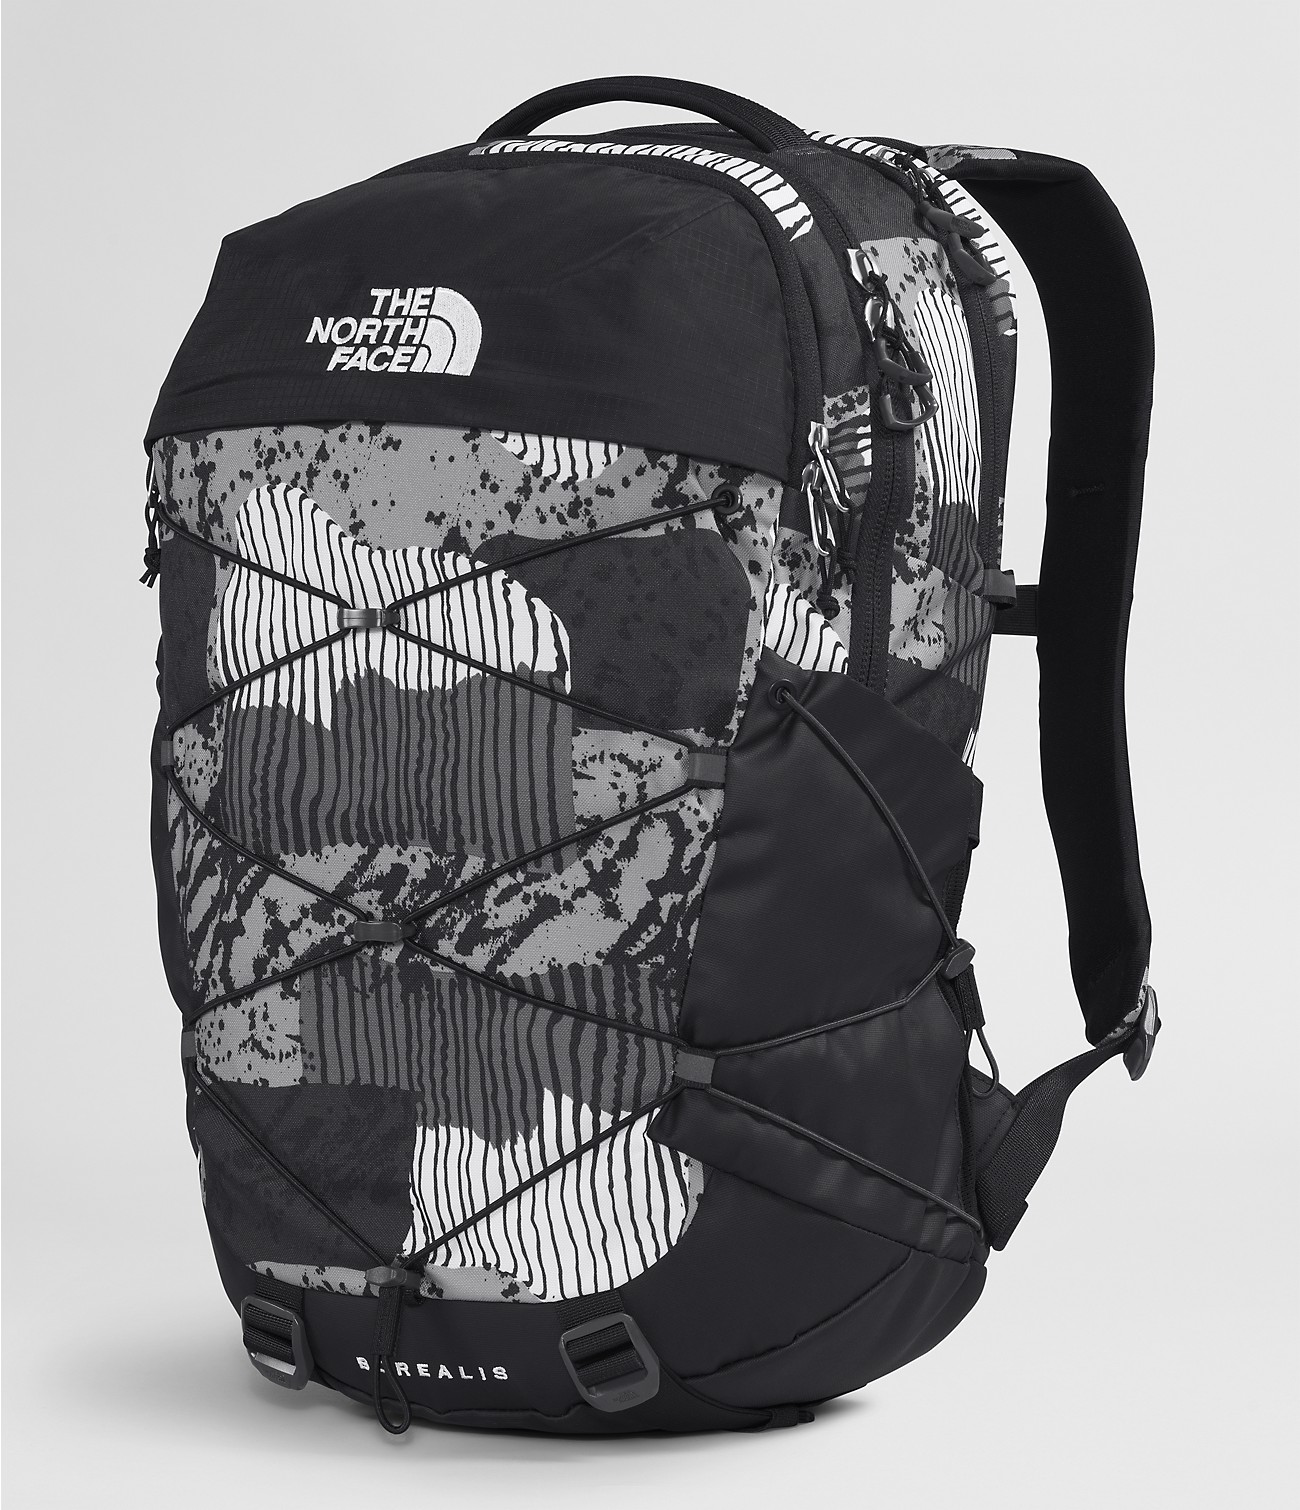 Unlock Wilderness' choice in the Swiss Gear Vs North Face comparison, the Borealis Backpack by The North Face